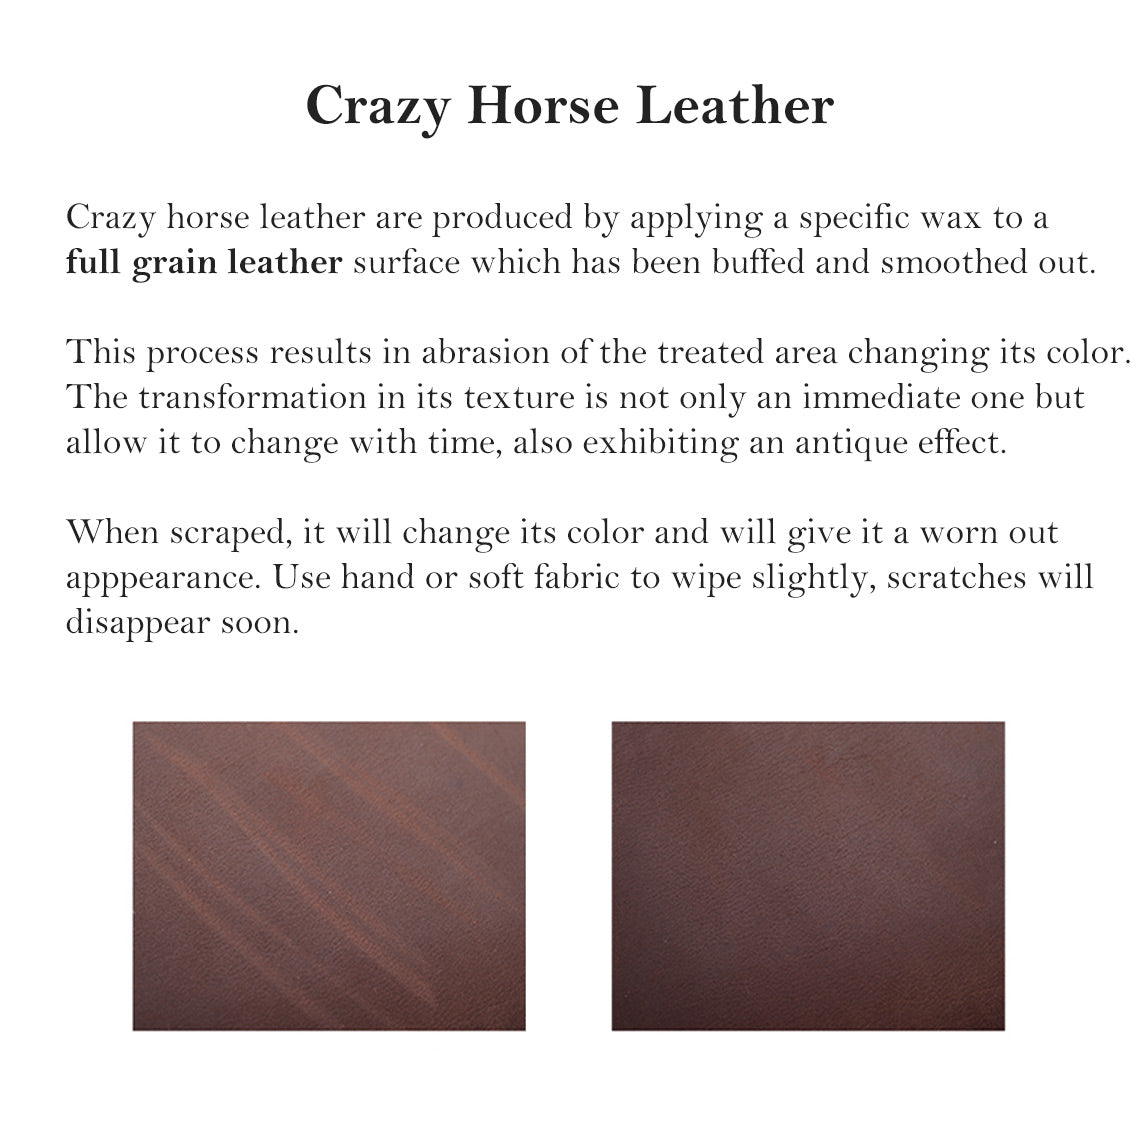 Crazy Horse Leather | Genuine Crazy Horse Leather Goods - Green Leather Vintage Style Handmade Leather Wallet | DIY Wallet Making Kit - POPSEWING™